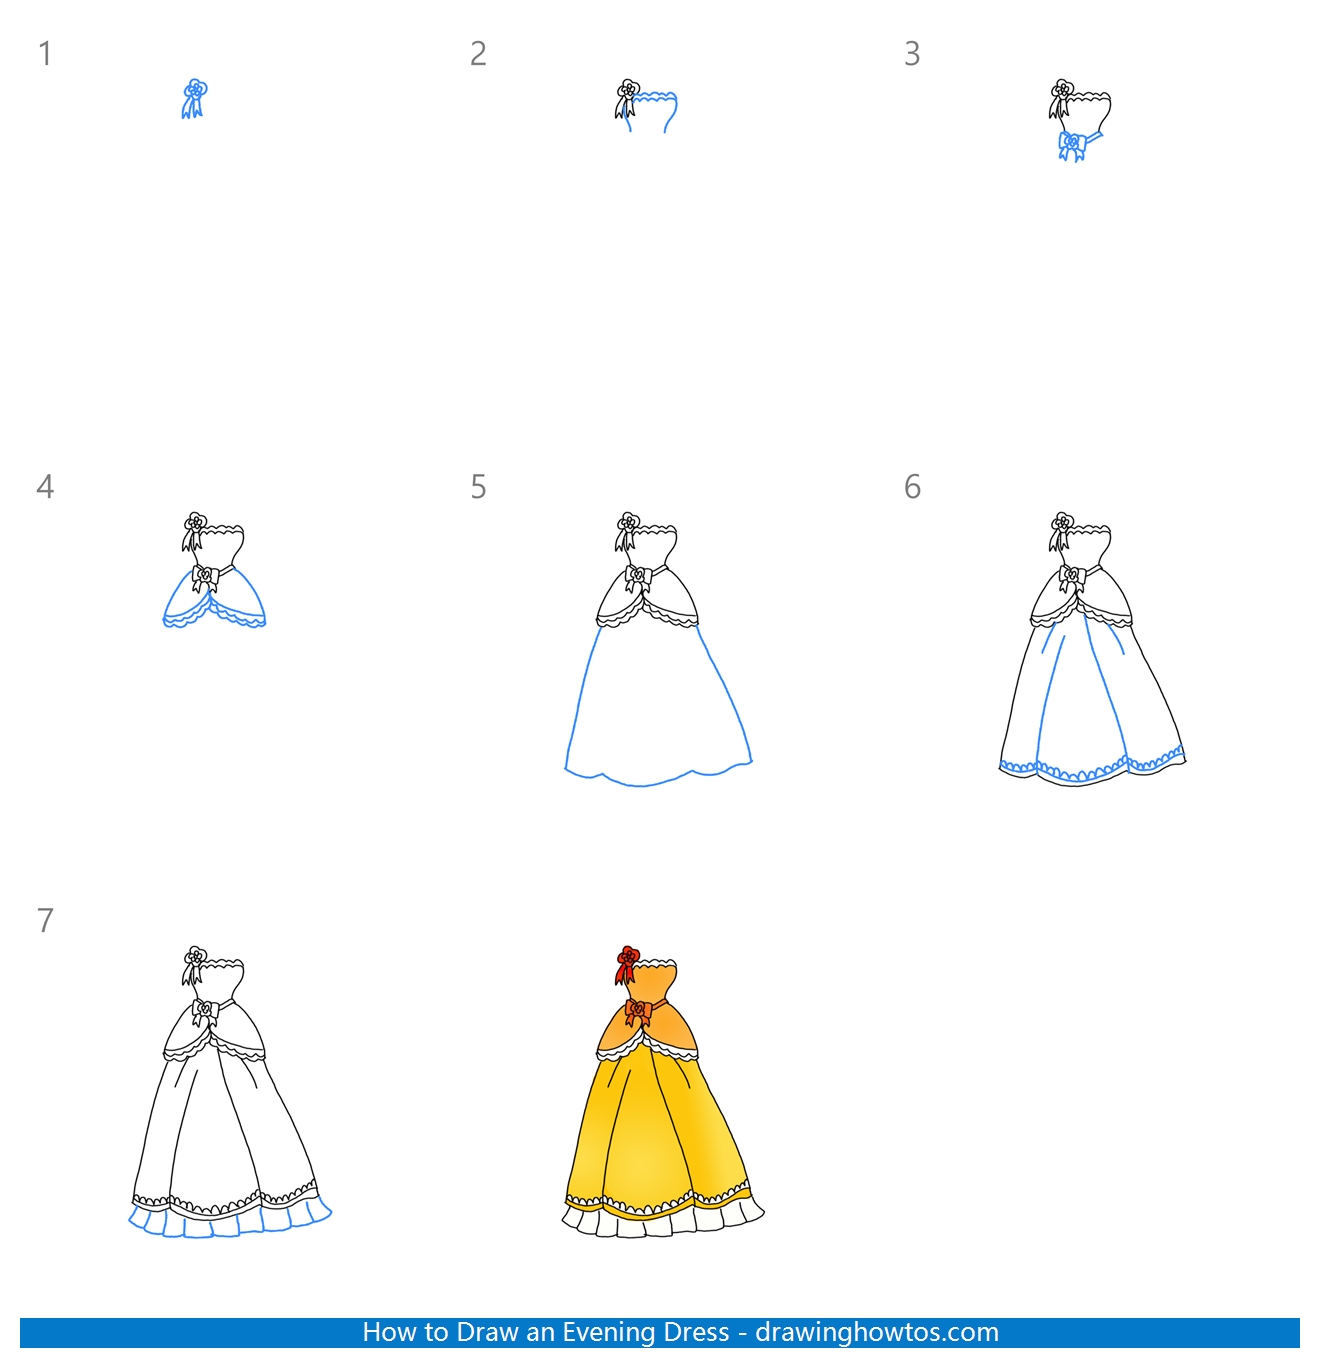 How to Draw an Evening Dress Step by Step